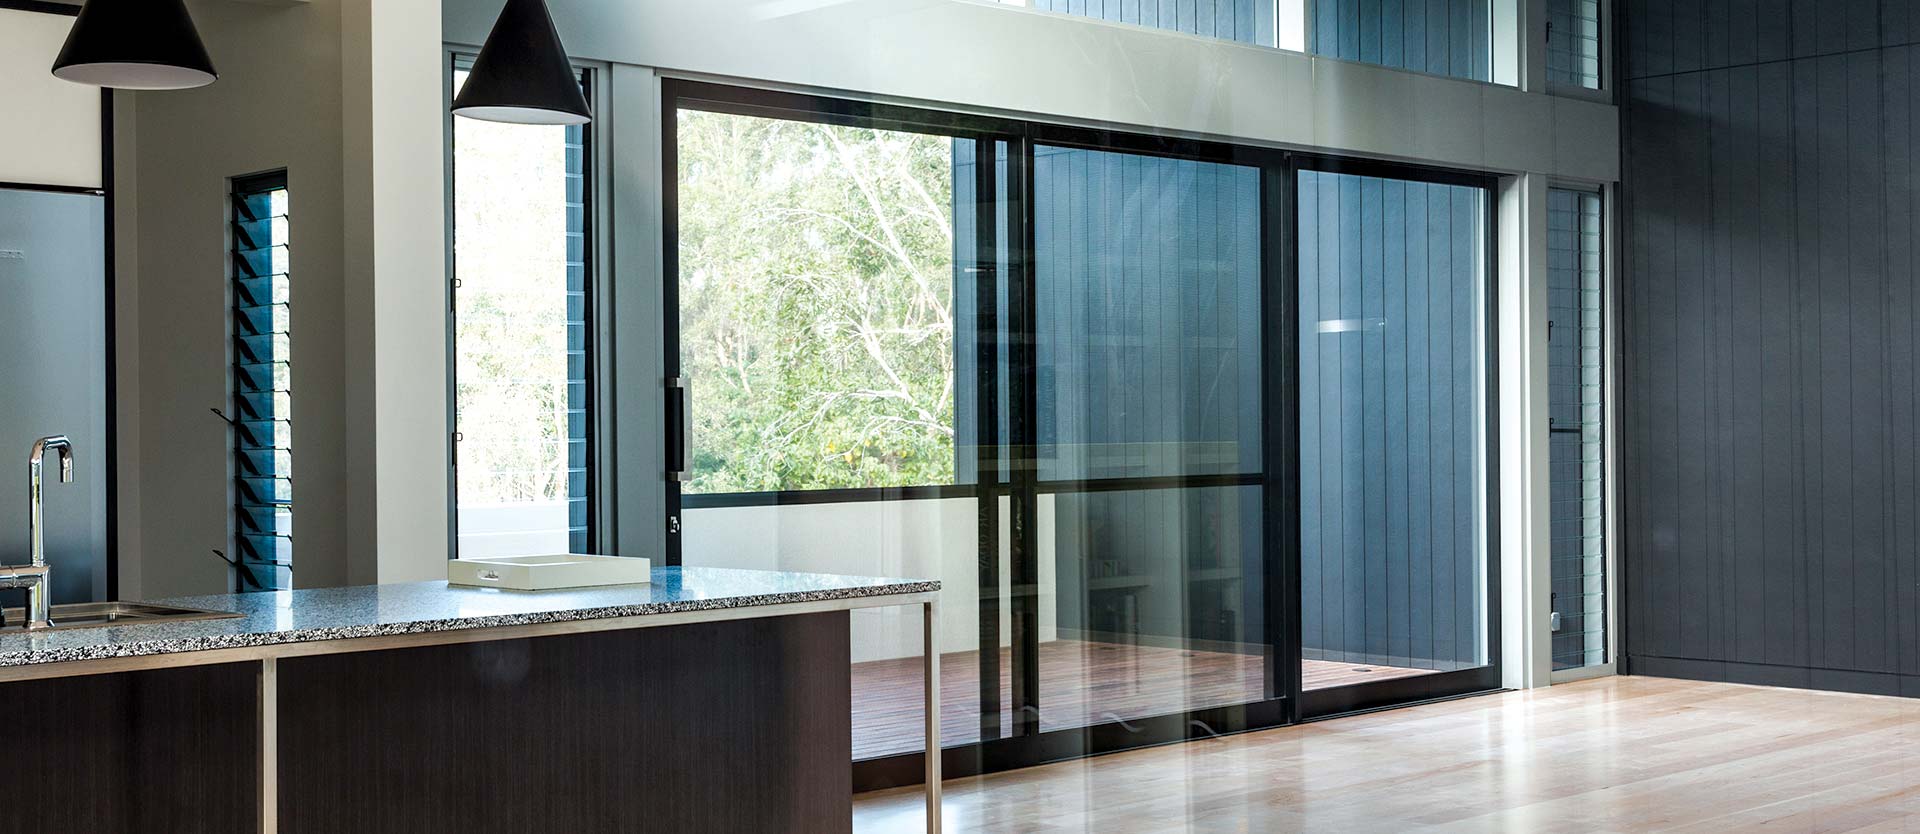 interior of a modern house with Forcefield Security screens installed